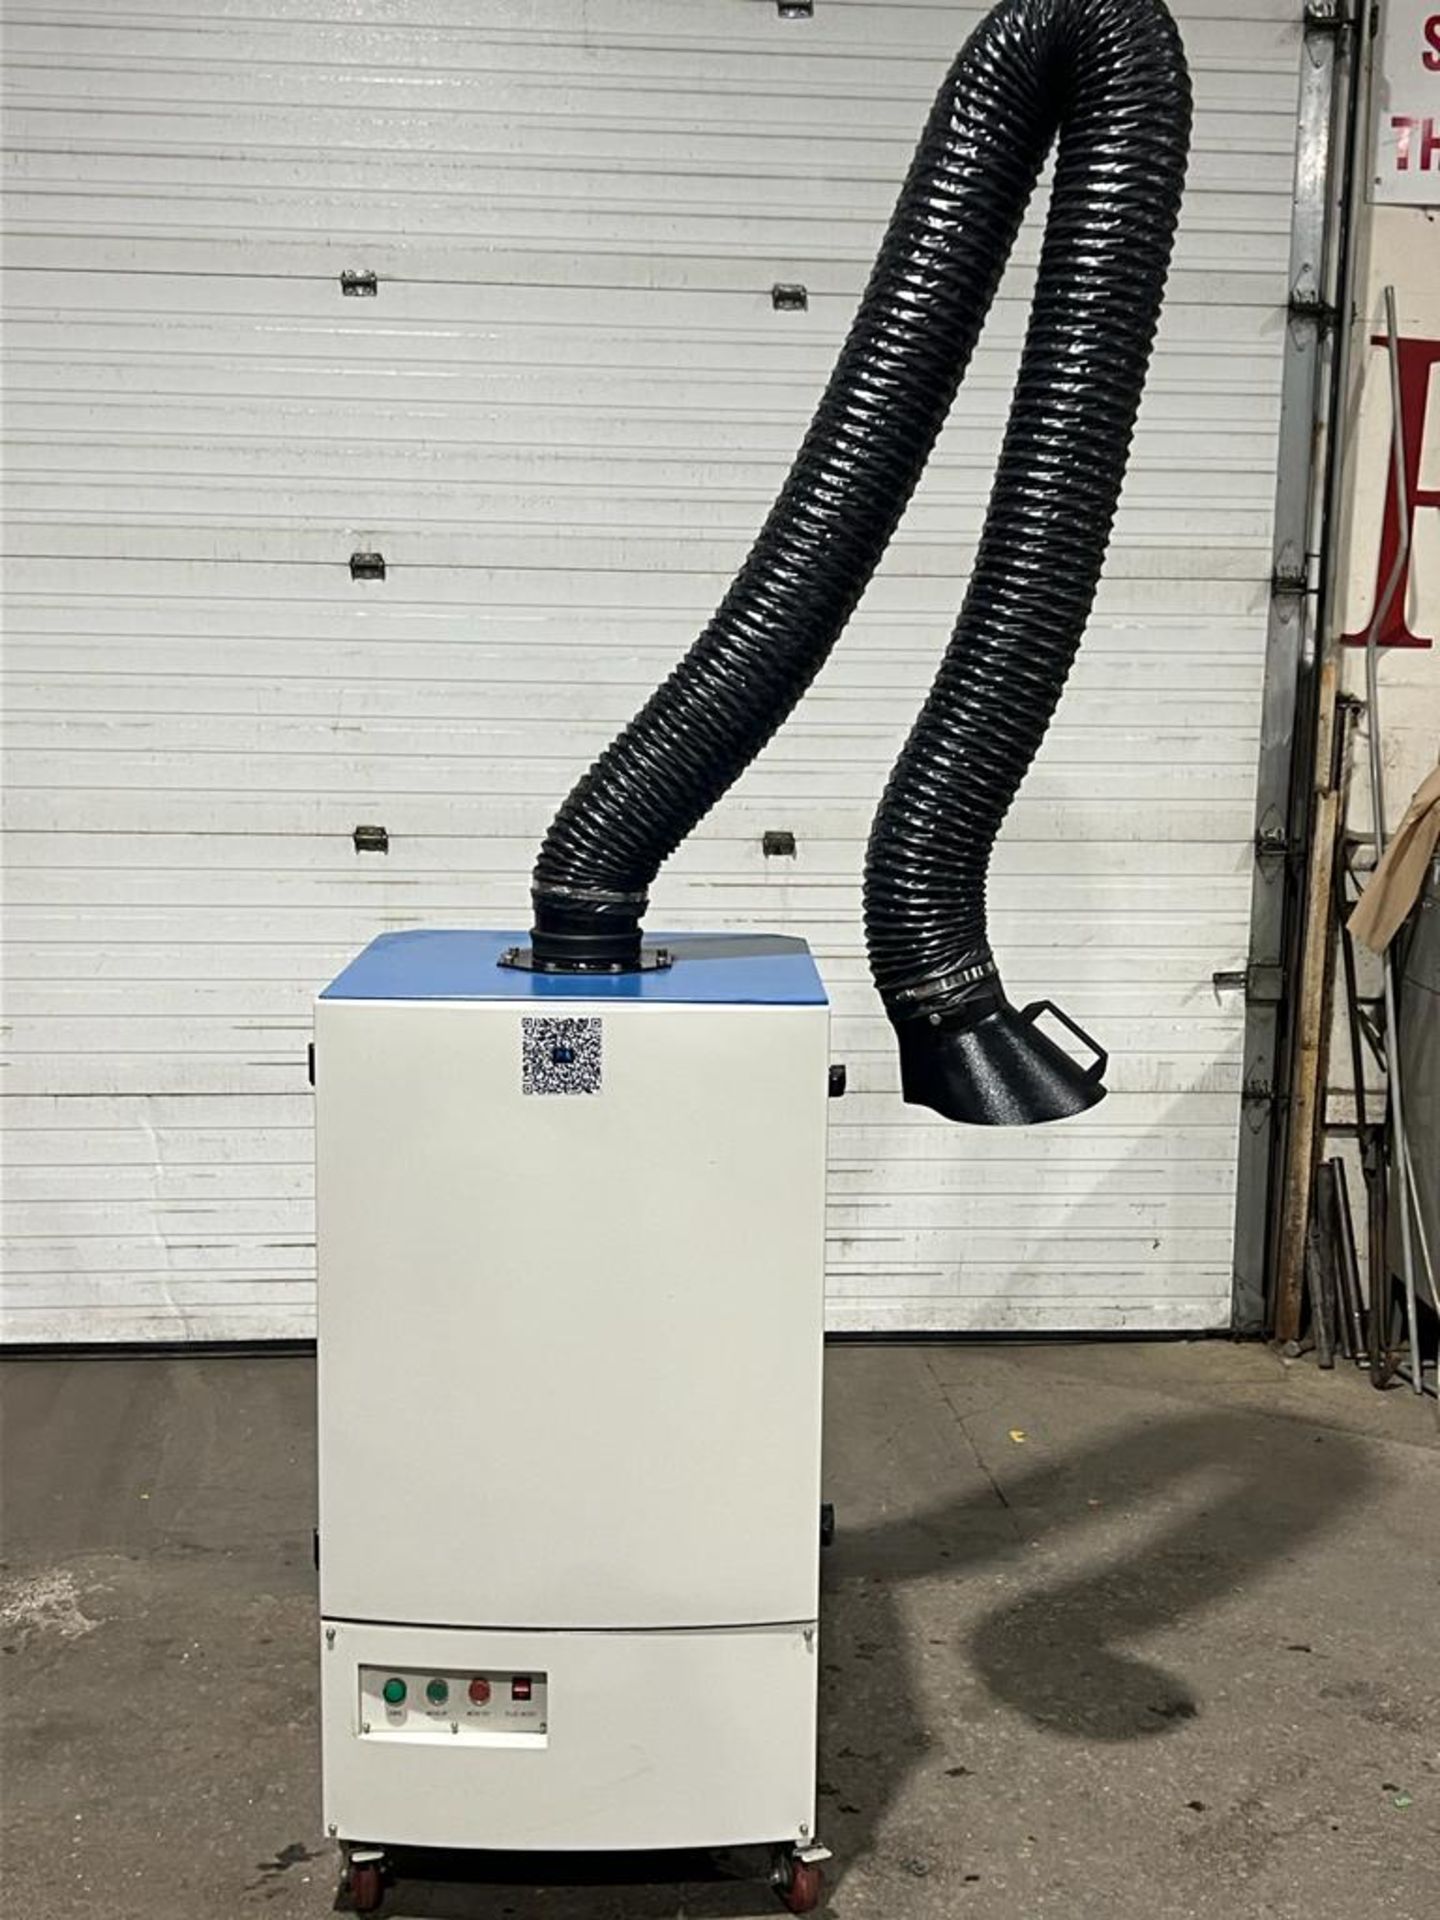 NEW Pneu-Airtec Fume Extractor with MINT long reach snorkel arm - 120V single phase - MINT & UNUSED